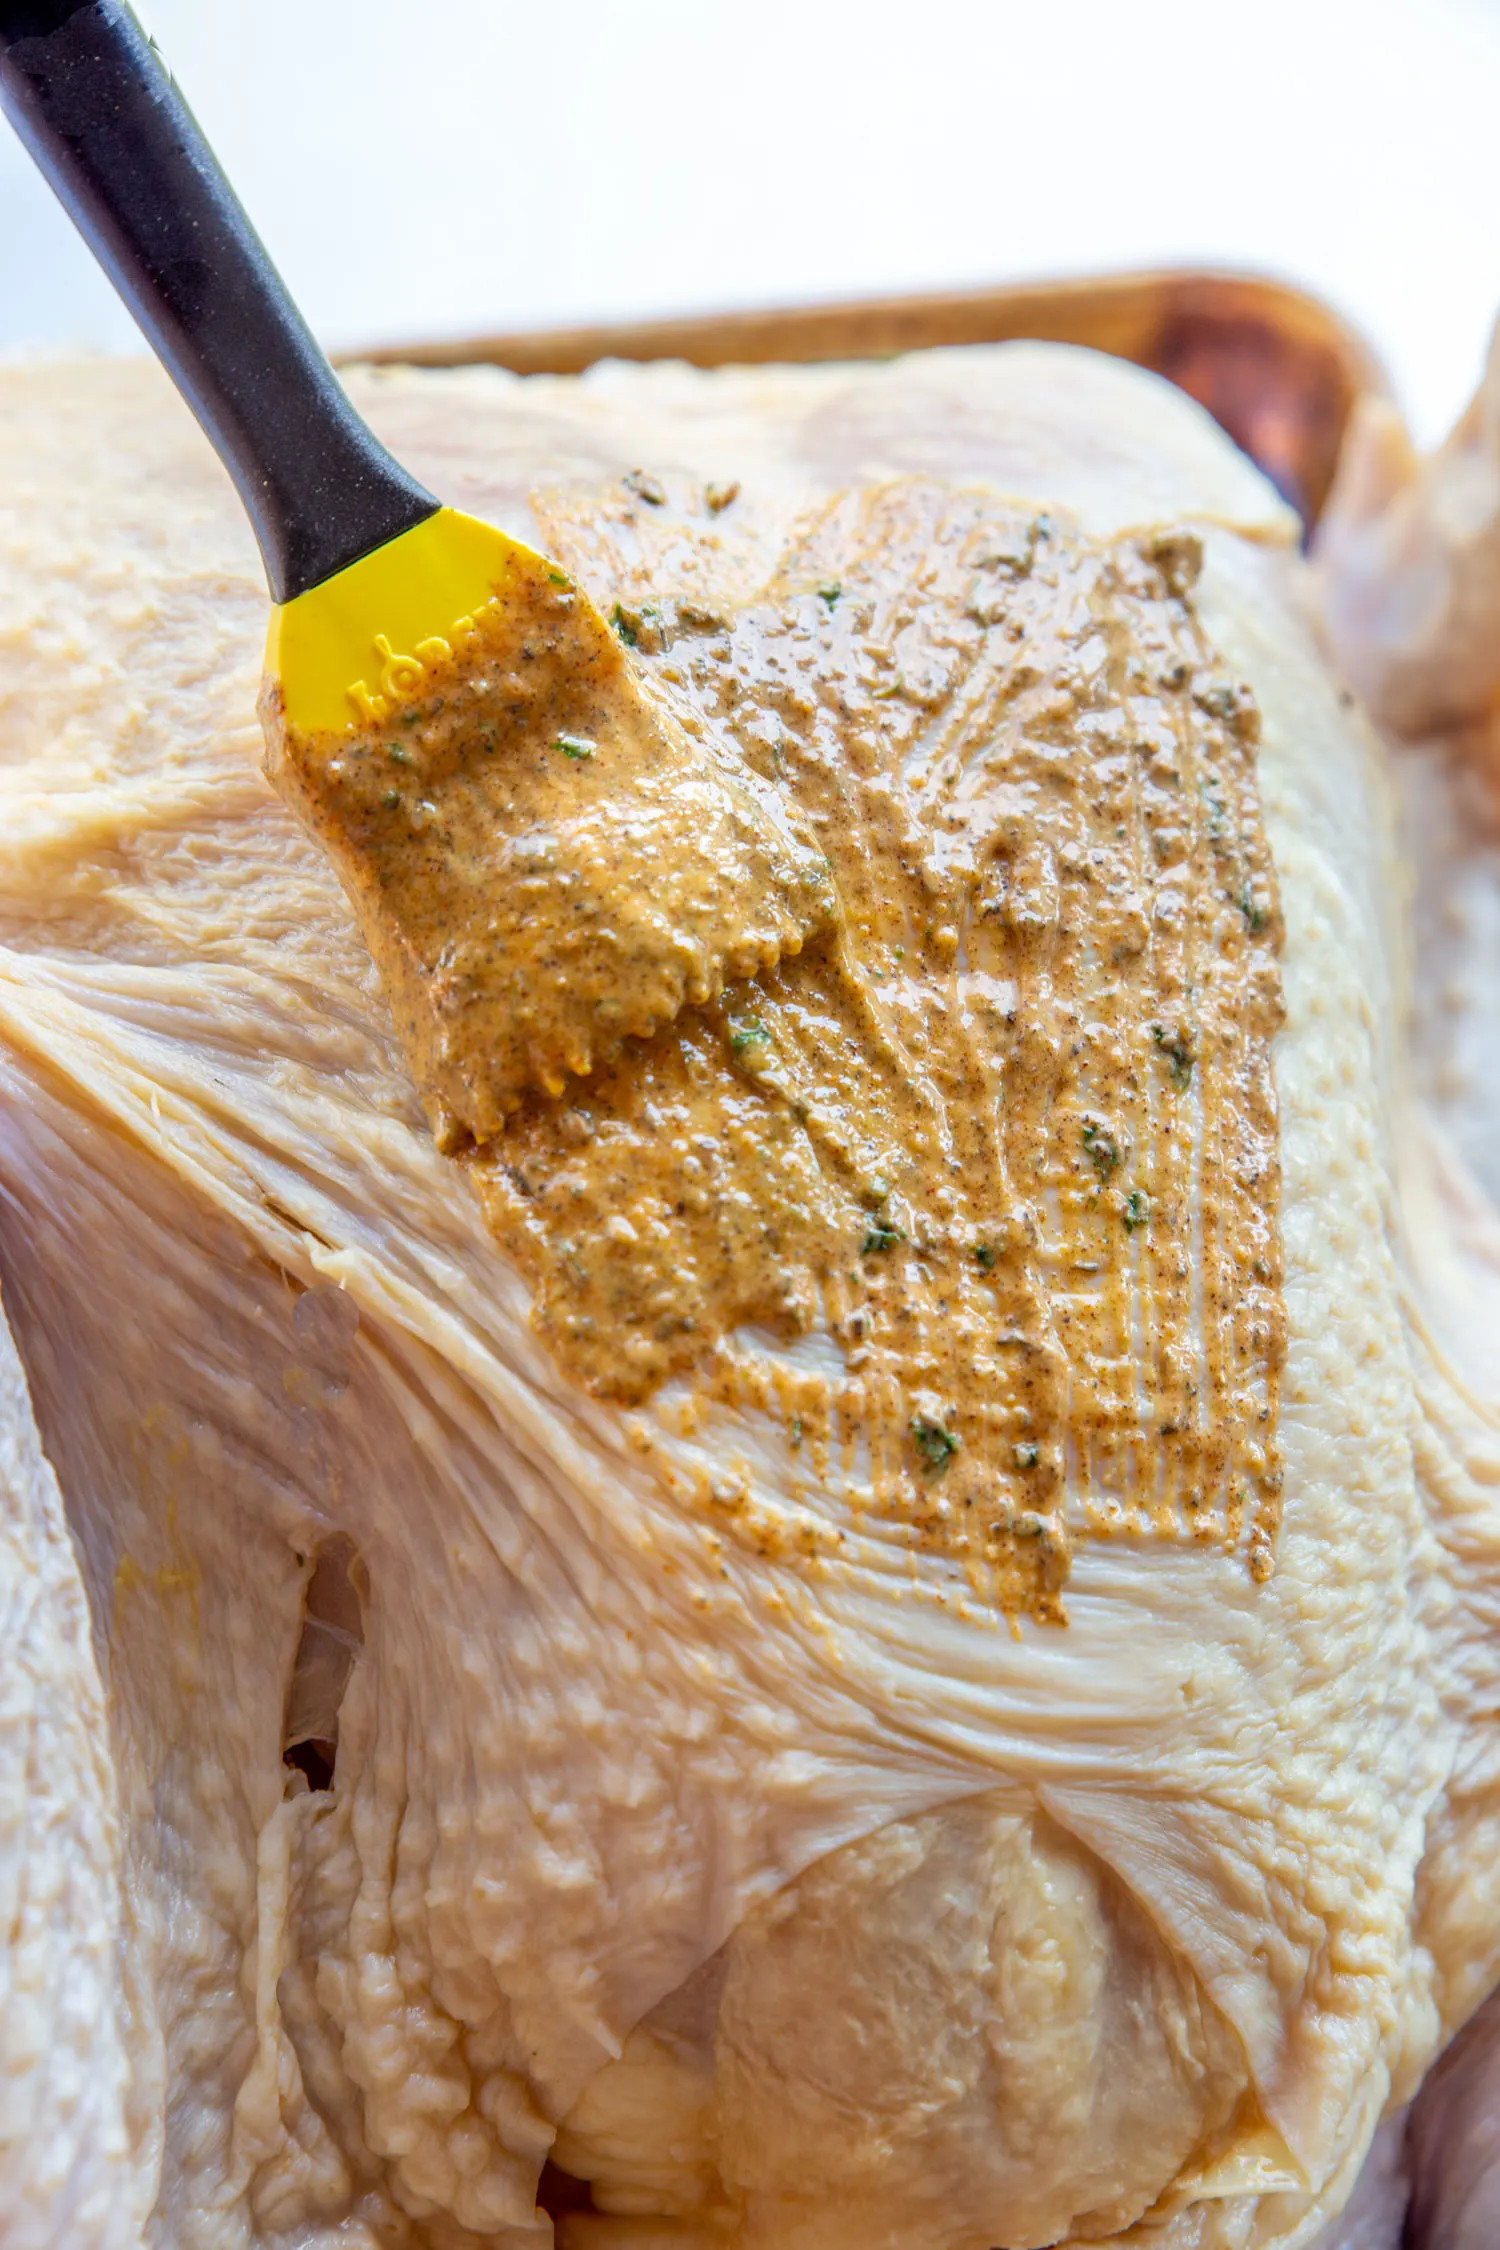 A raw turkey being painted with a silicone basting brush containing the turkey compound butter mixture.